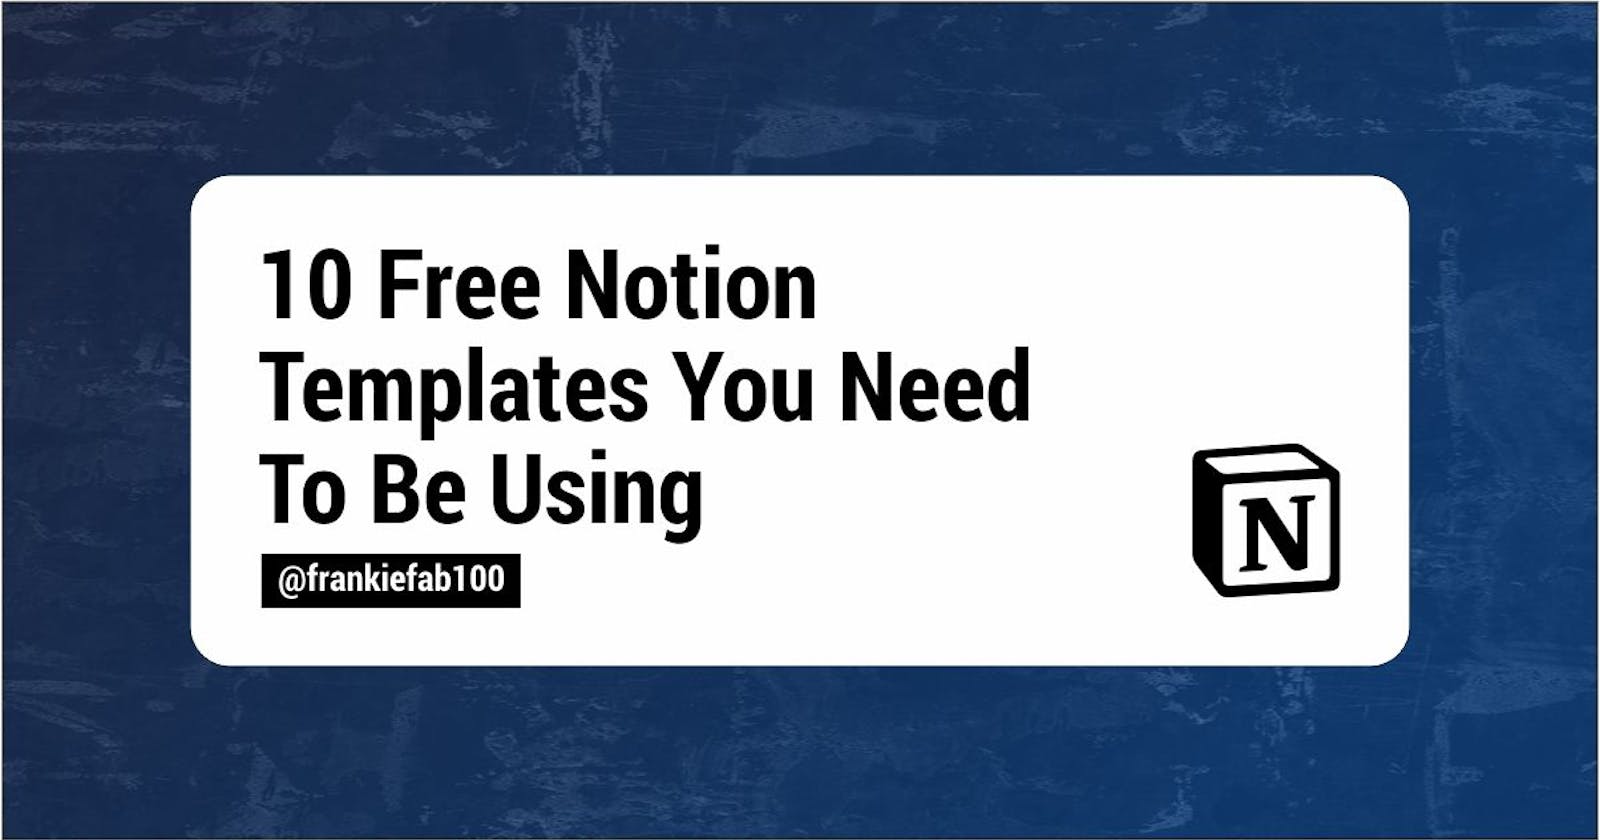 10 Free Notion Templates You Need To Be Using